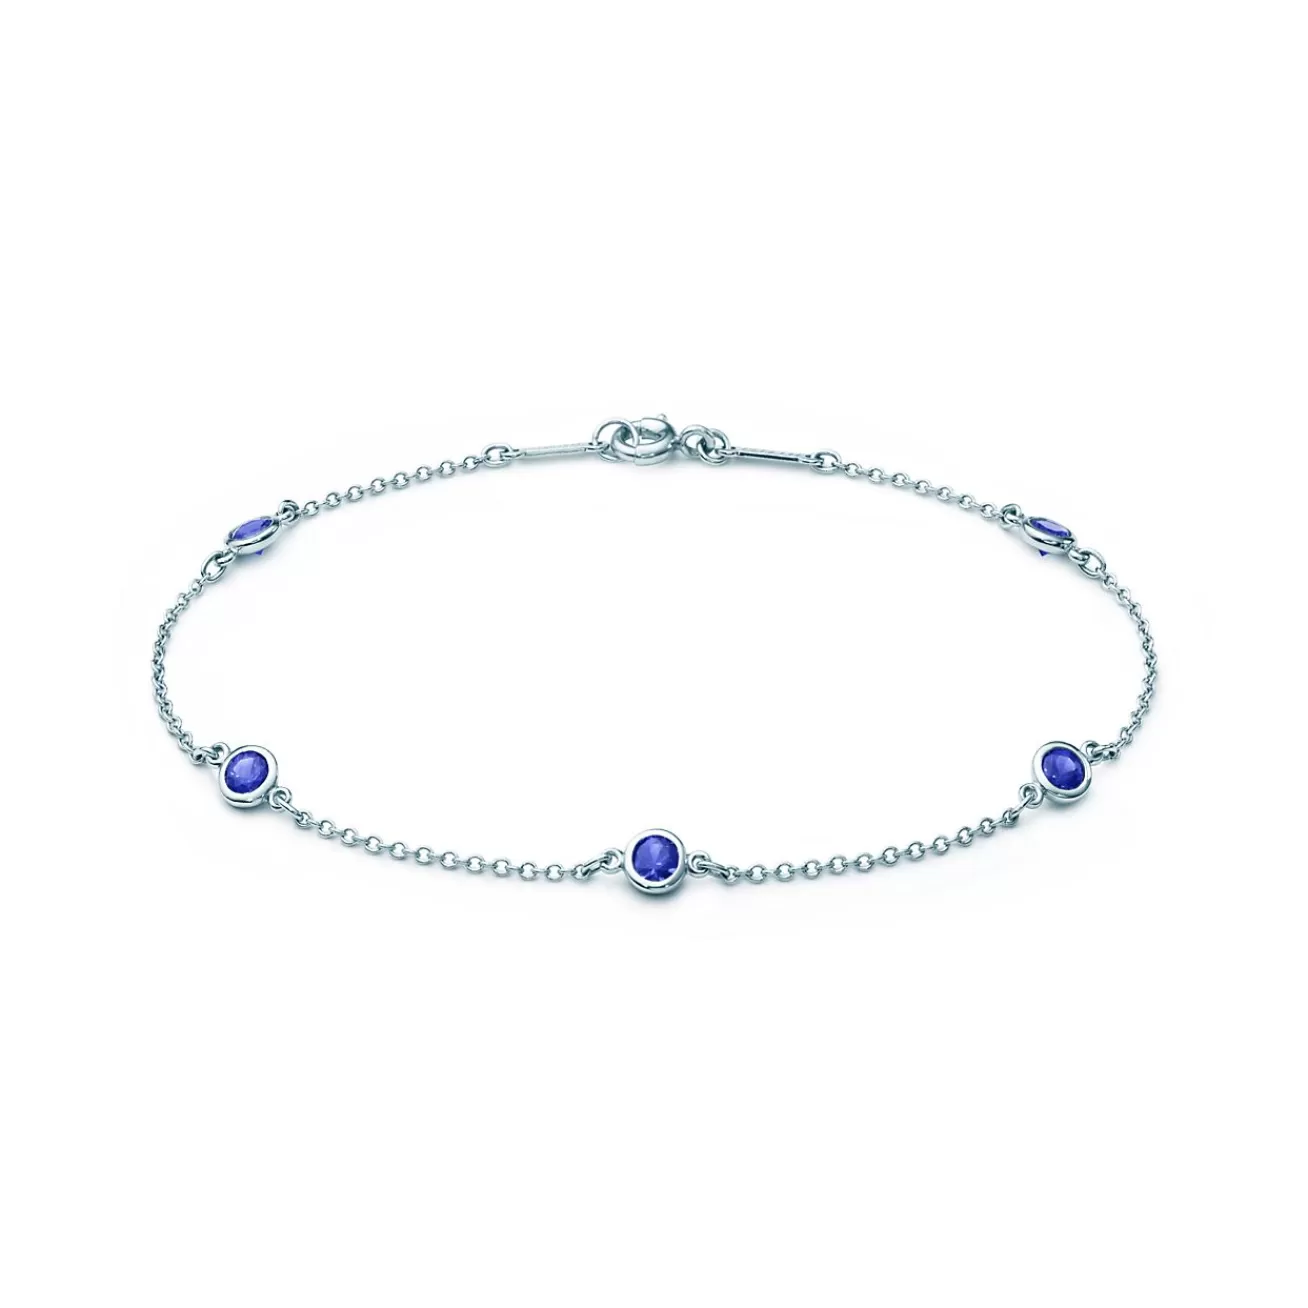 Tiffany & Co. Elsa Peretti® Color by the Yard bracelet in platinum with sapphires. | ^ Bracelets | Platinum Jewelry